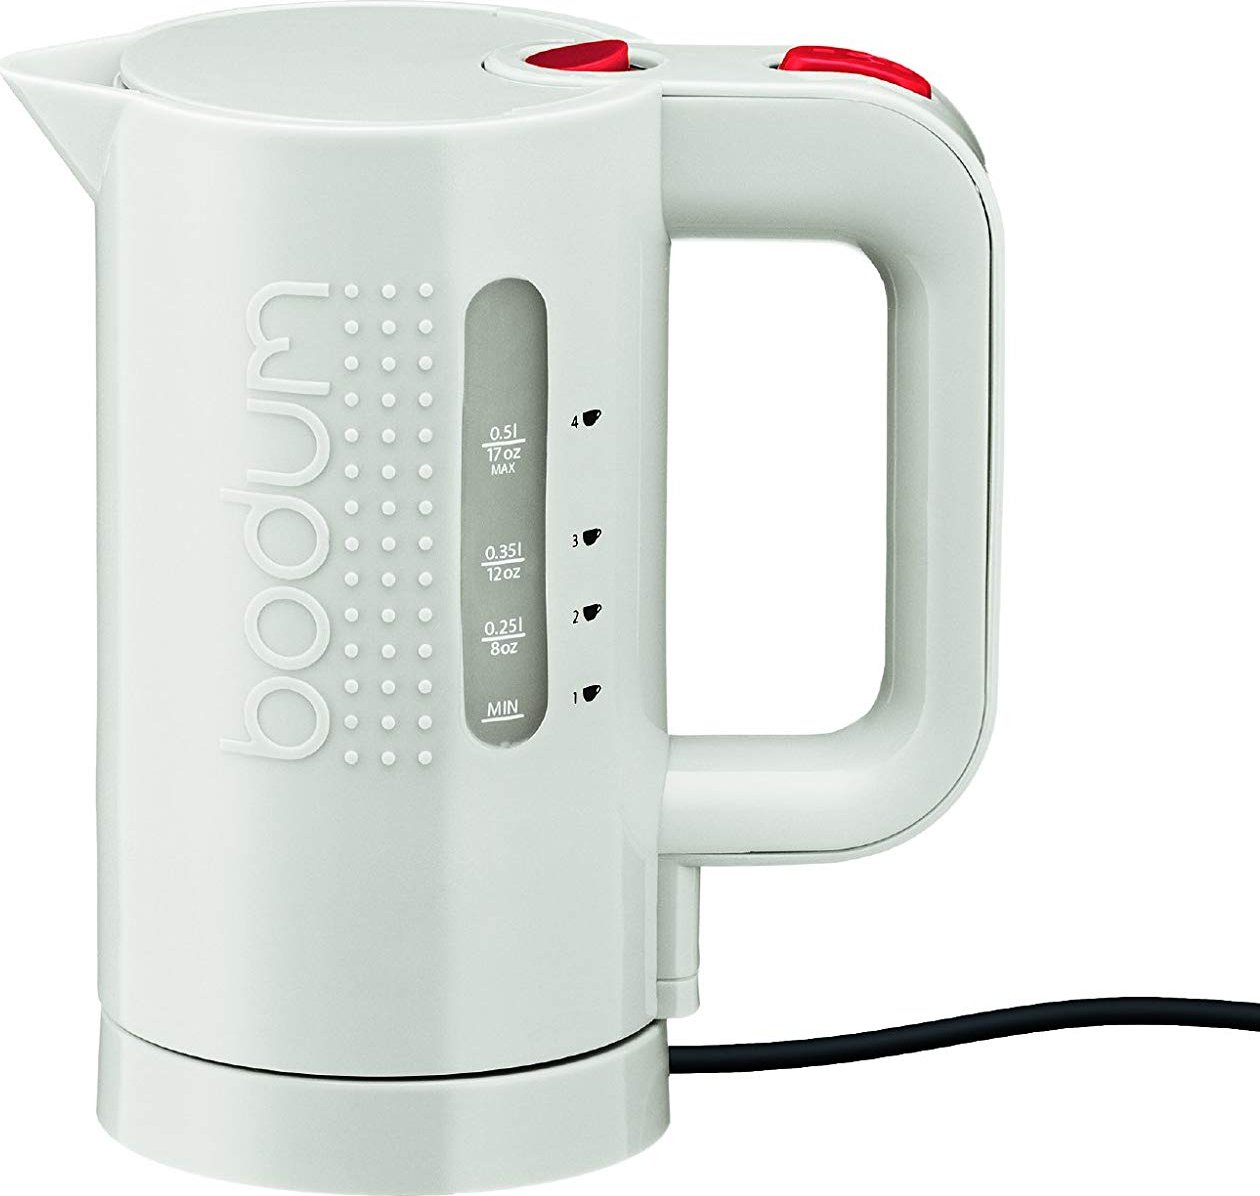 Bodum - Electric Water Kettle 17 oz Off White - 11451-913US